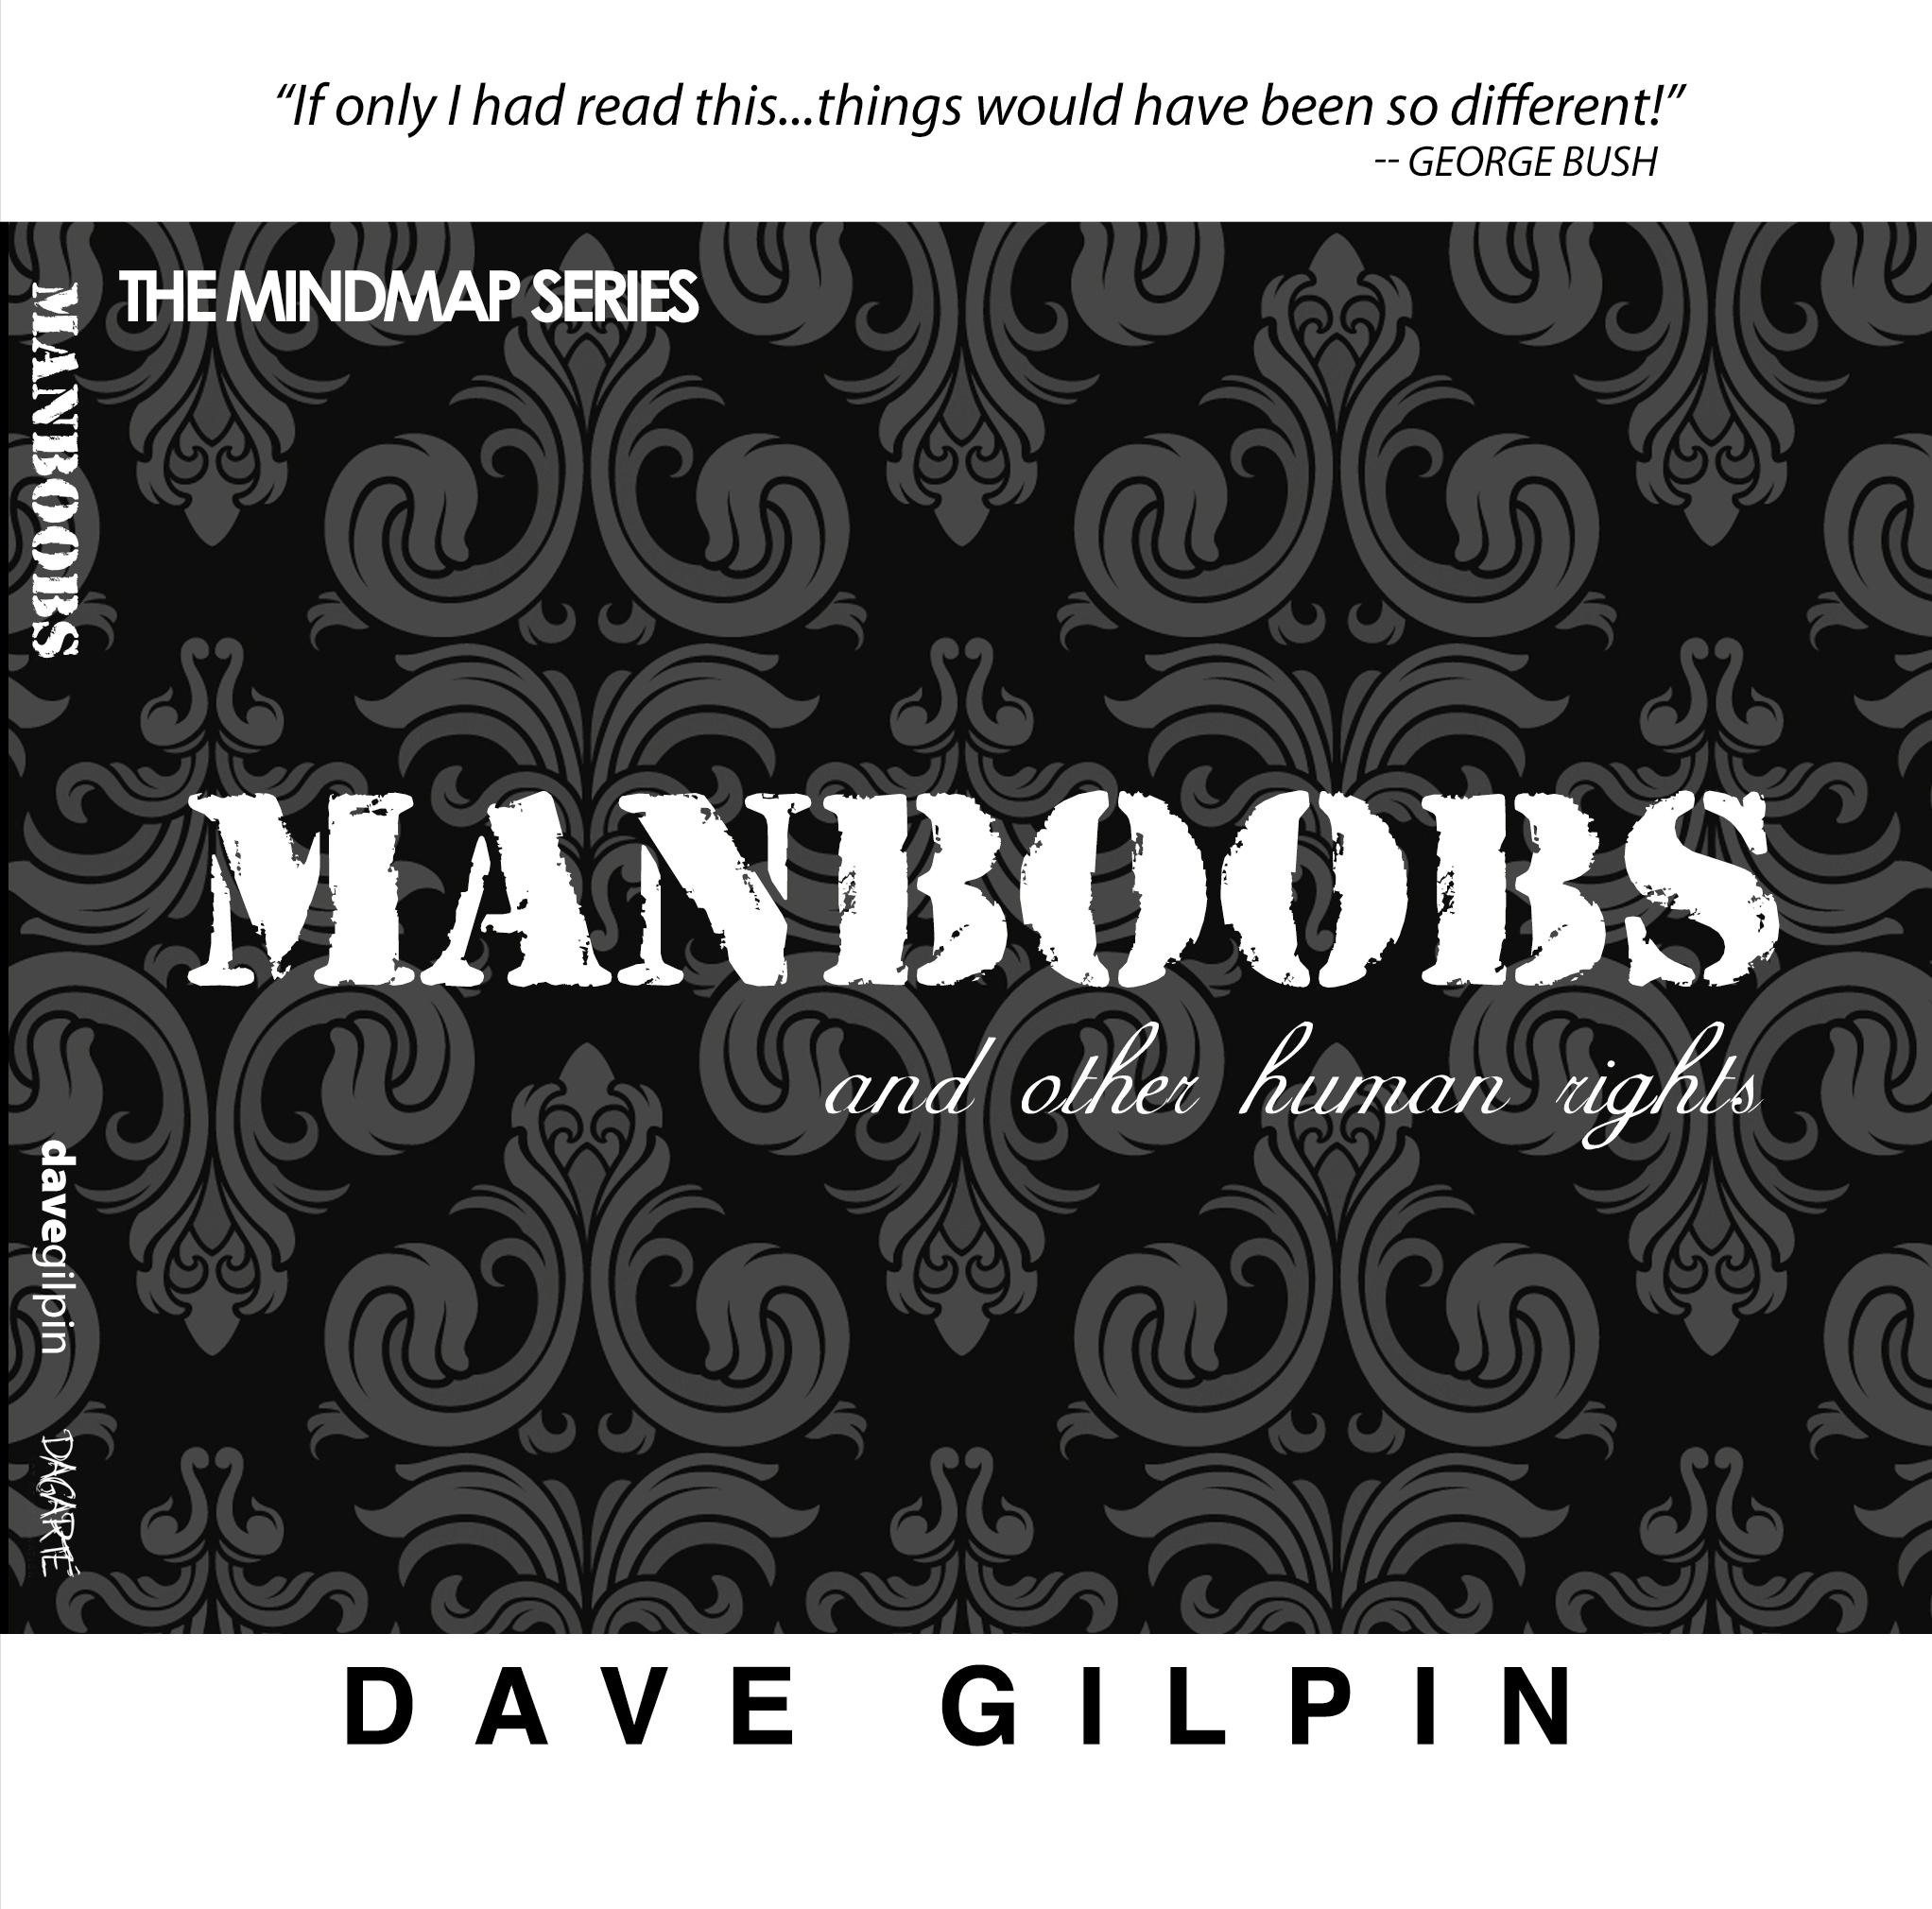 Manboobs – in defence of the male species